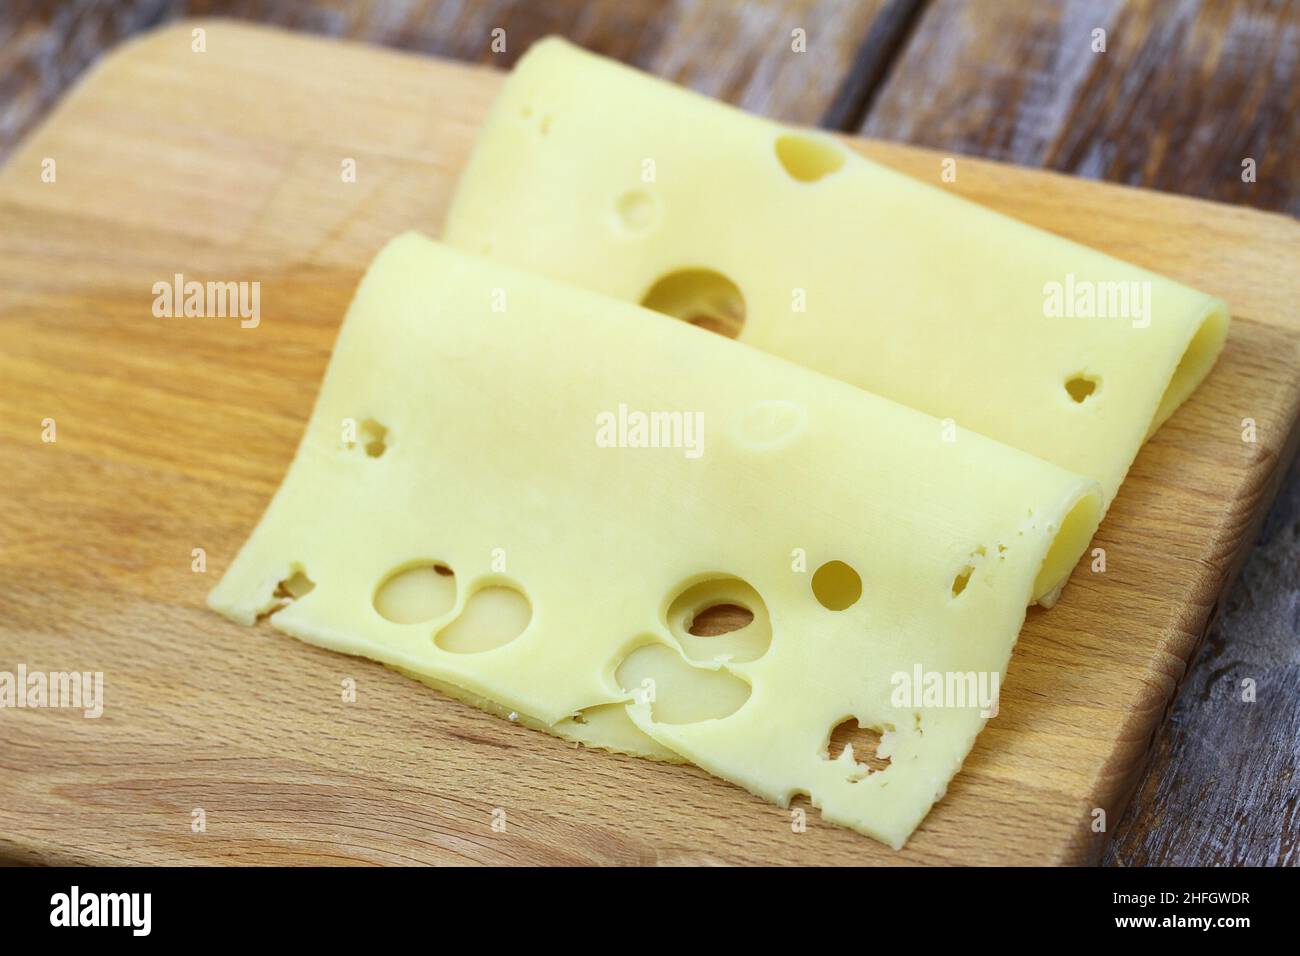 Two slices of Swiss cheese on wooden board Stock Photo